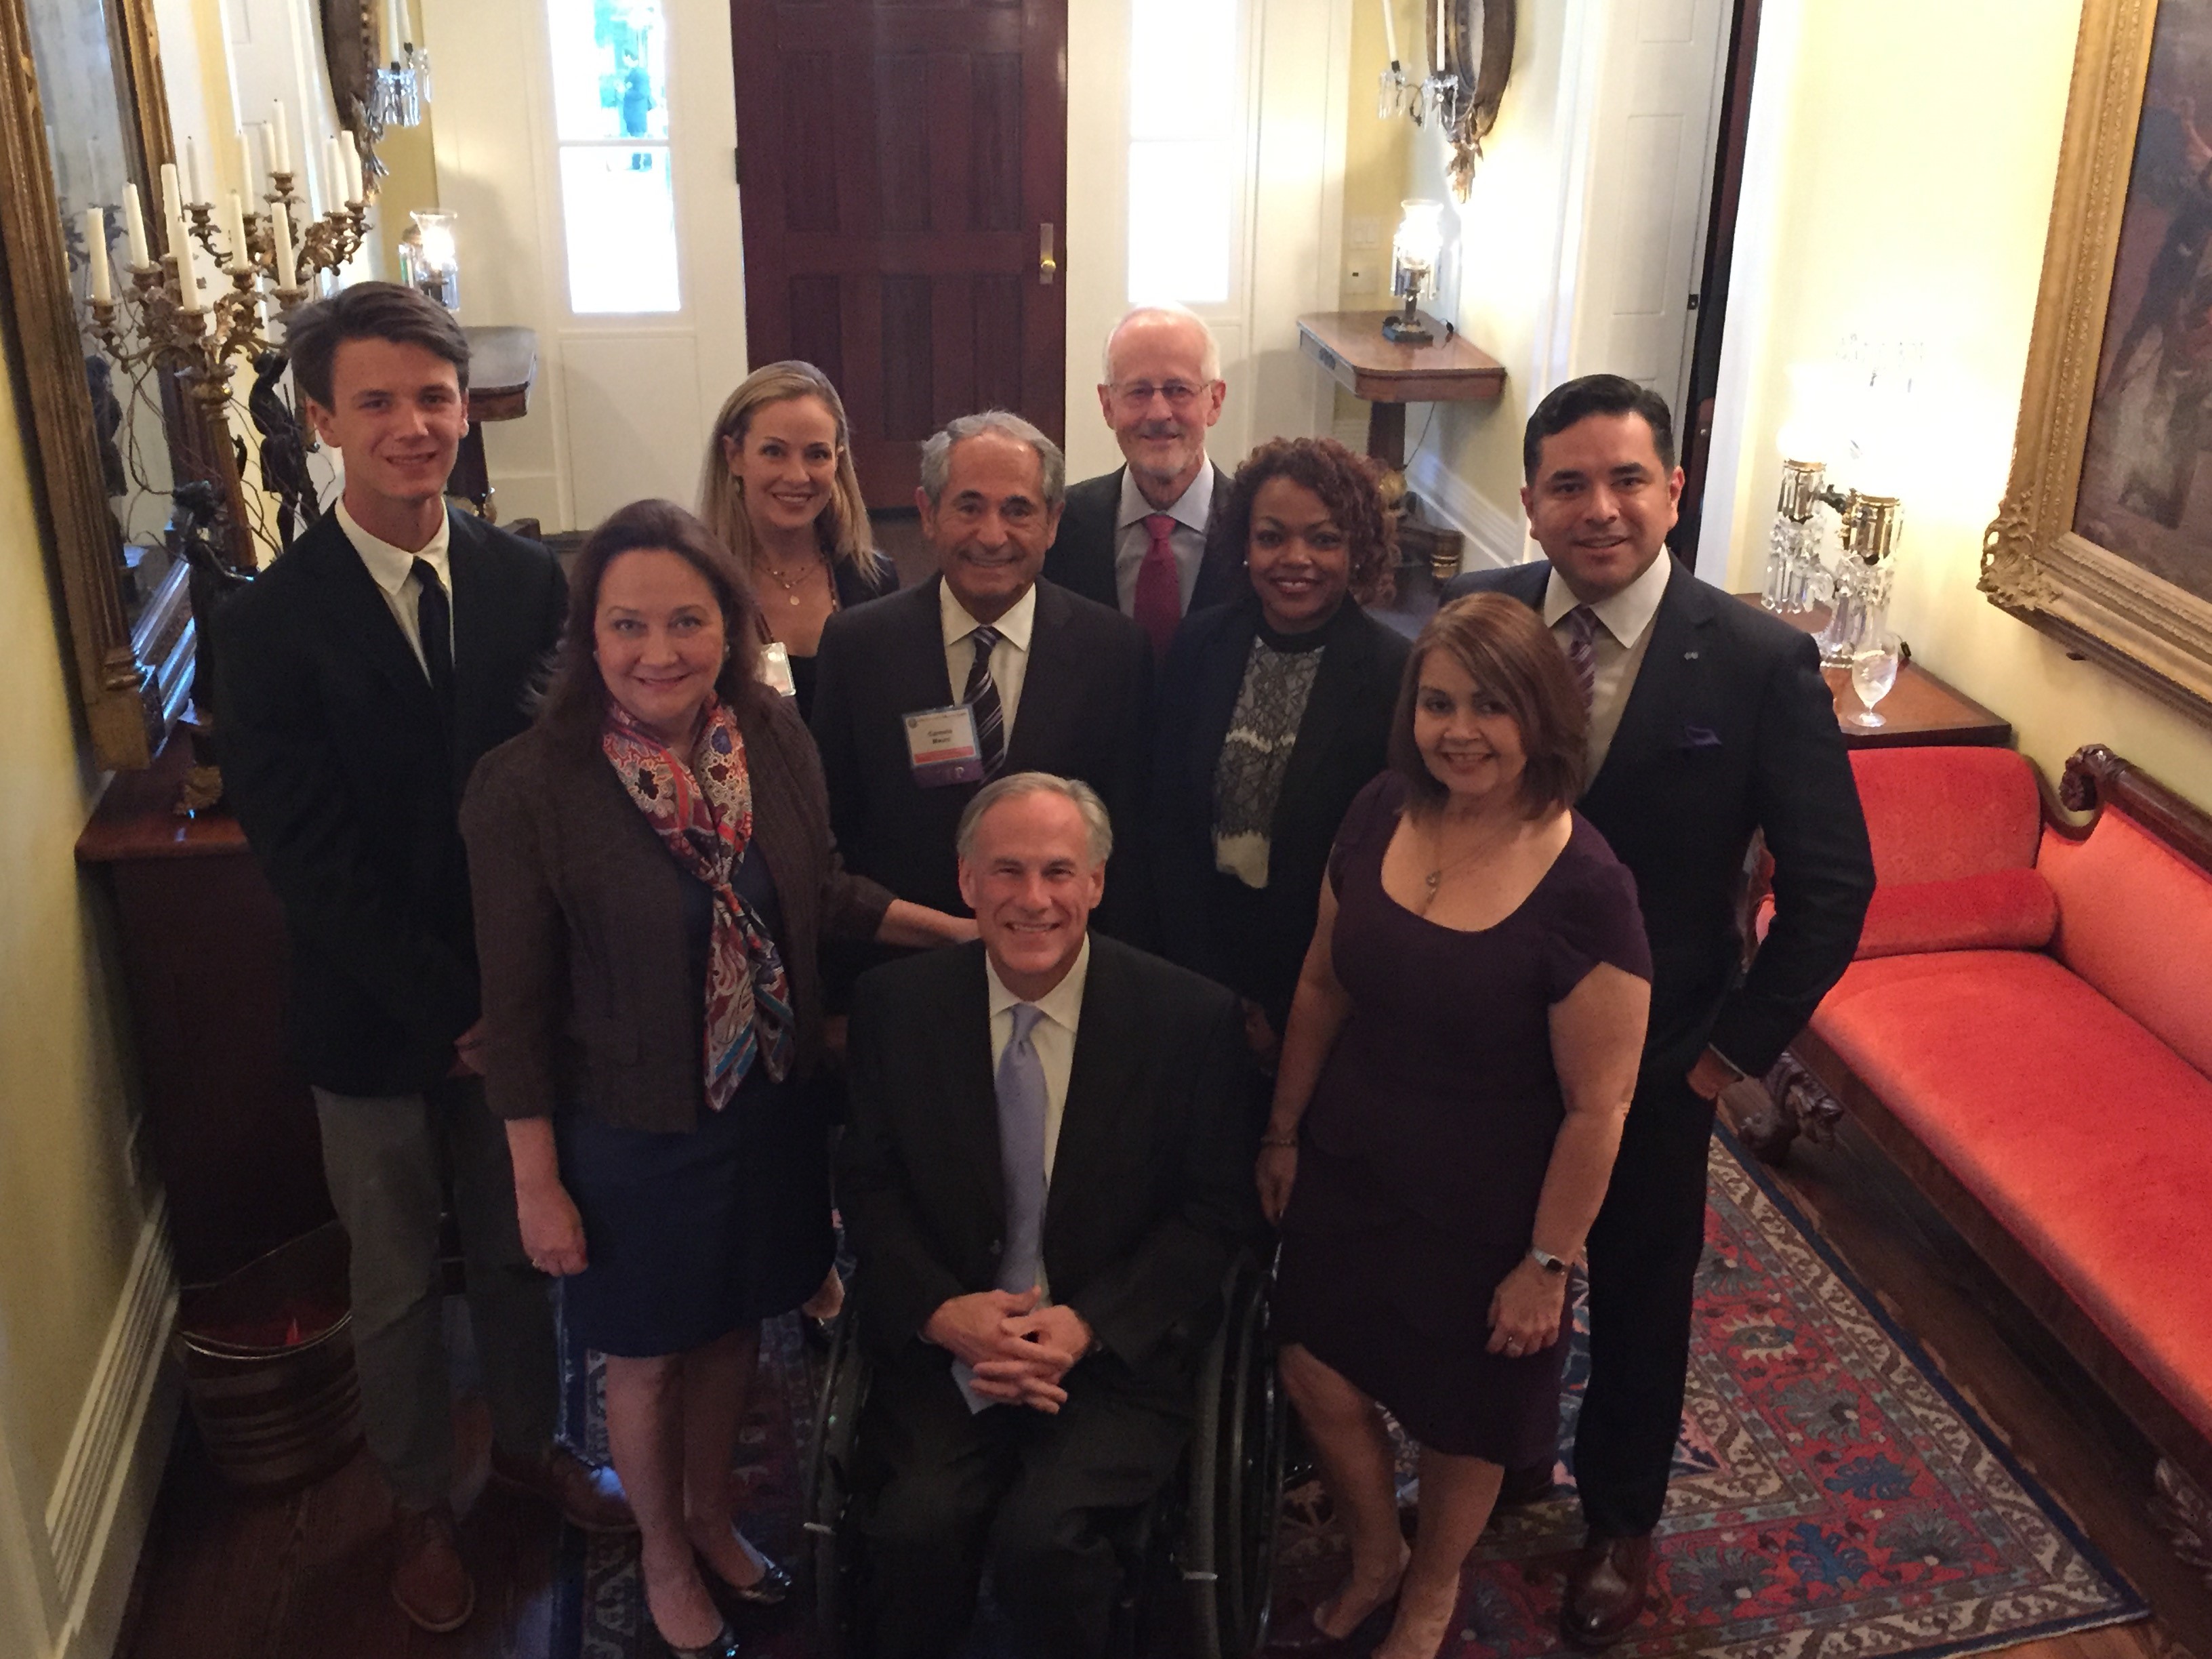 Winners of the 2016 Governor’s Volunteer Awards